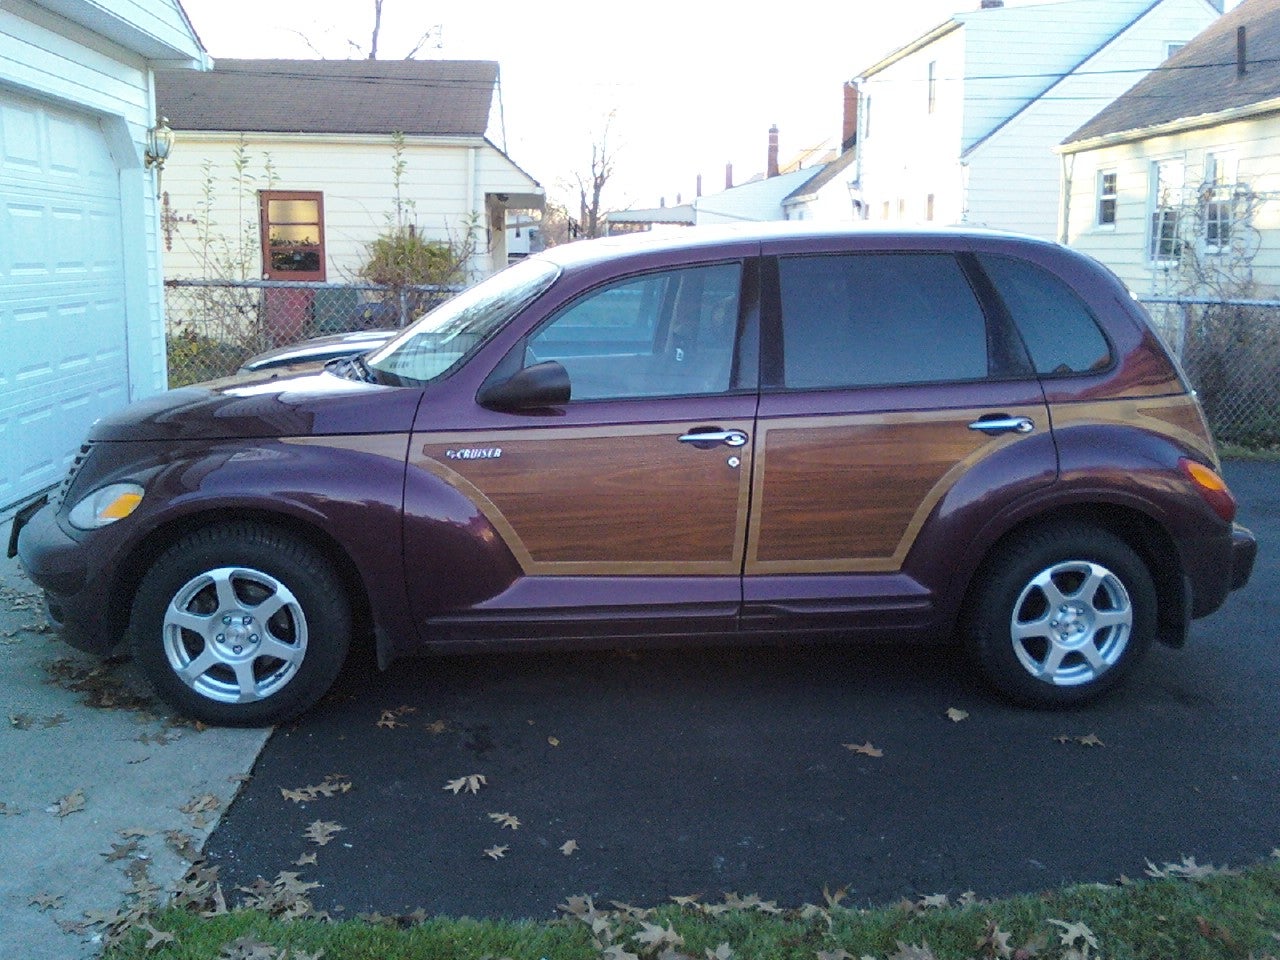 2003 Chrysler pt cruiser limited edition gas mileage #2